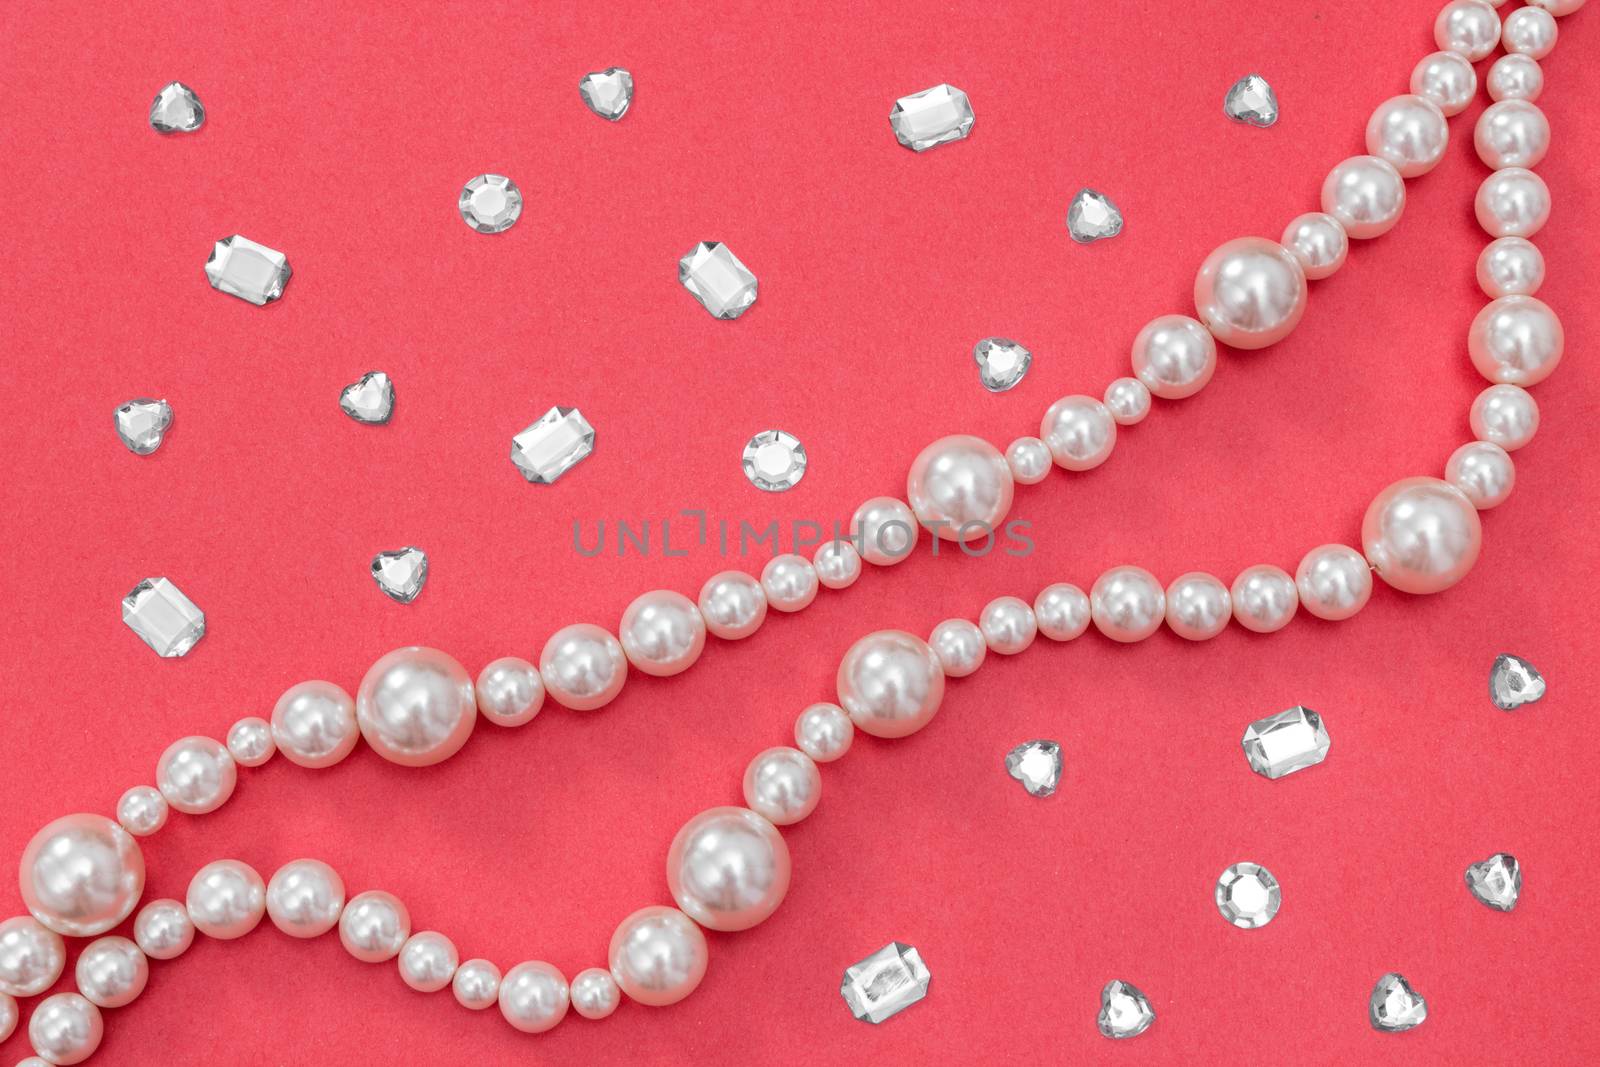 Pearl necklace and shiny gems on vivid pink background. Fashion background.